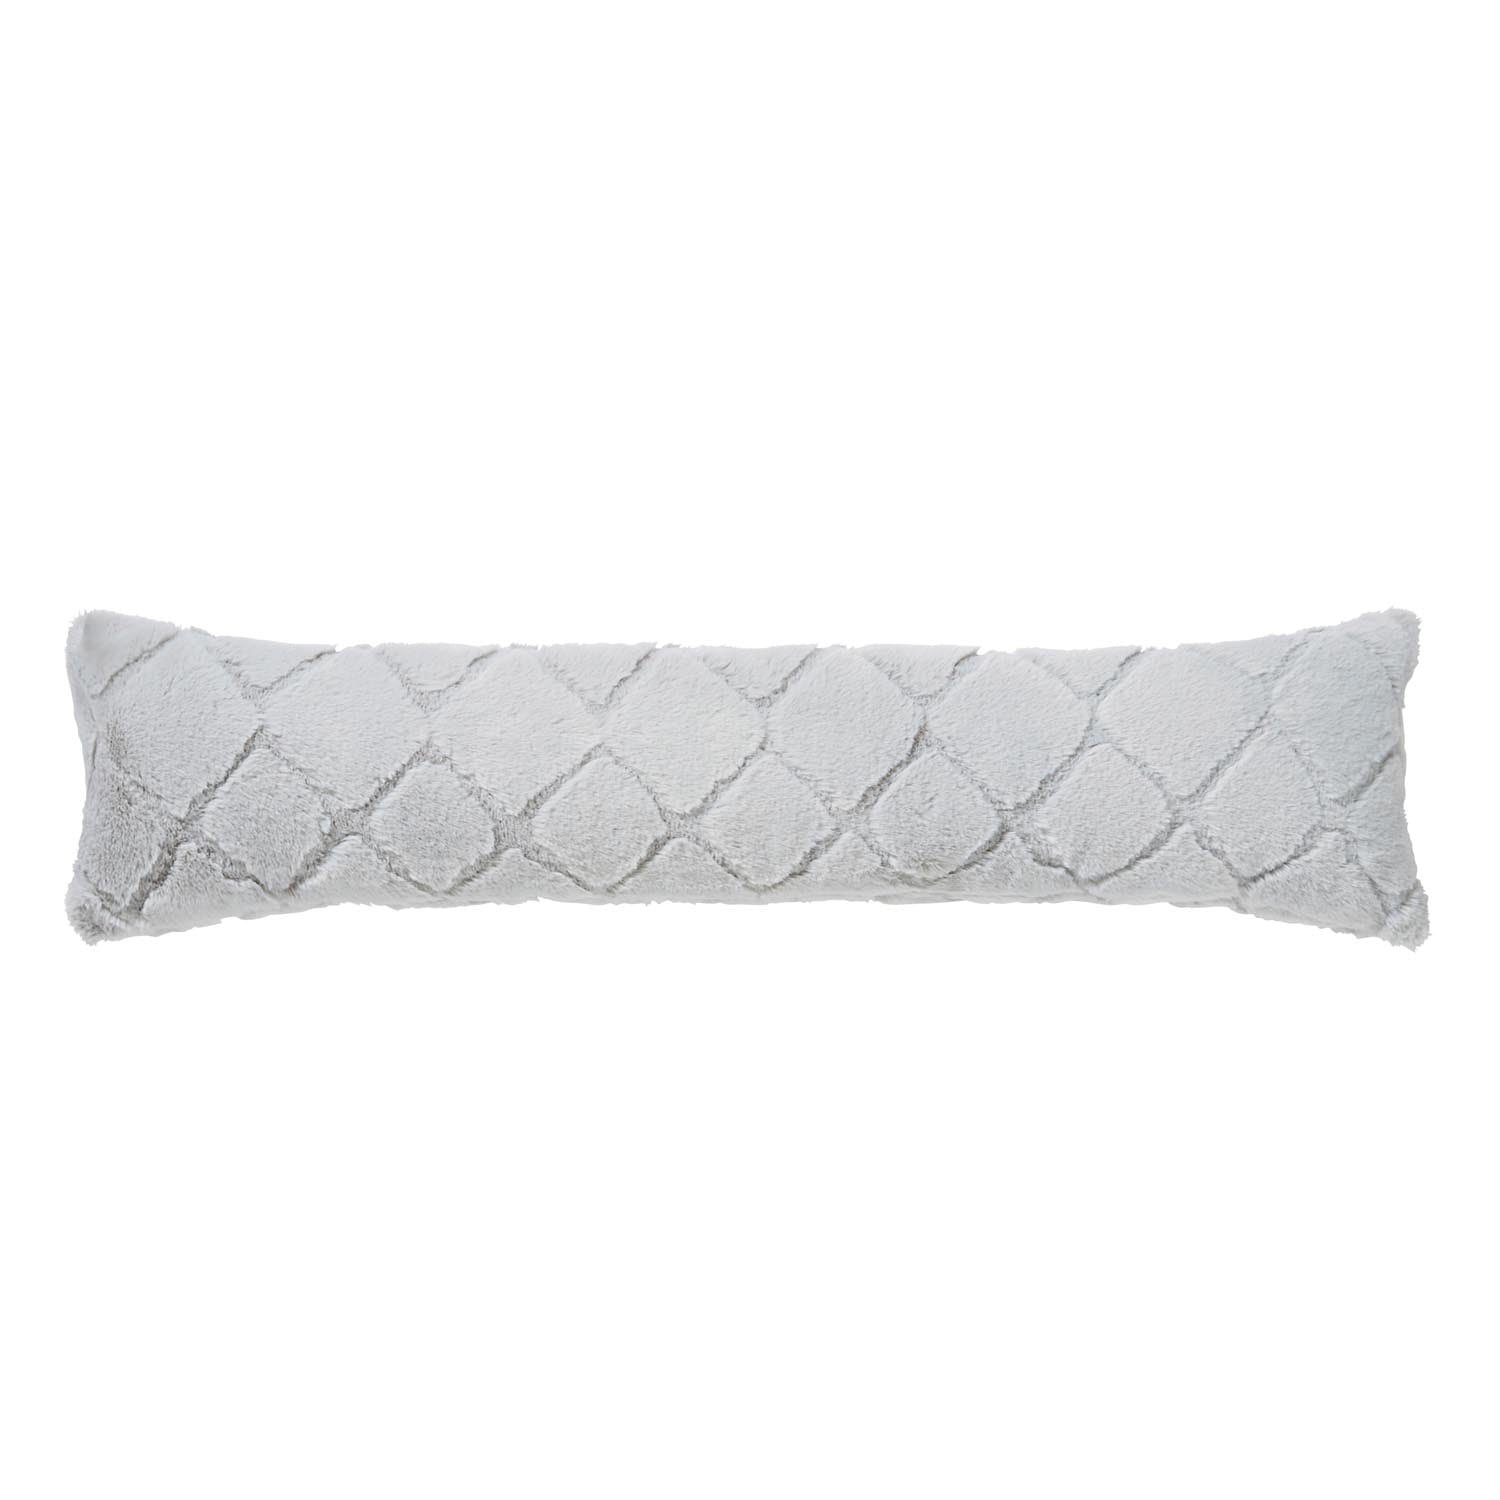 Catherine Lansfield Draught Excluder 90cm x 20cm - Silver / Grey 4 Shaws Department Stores